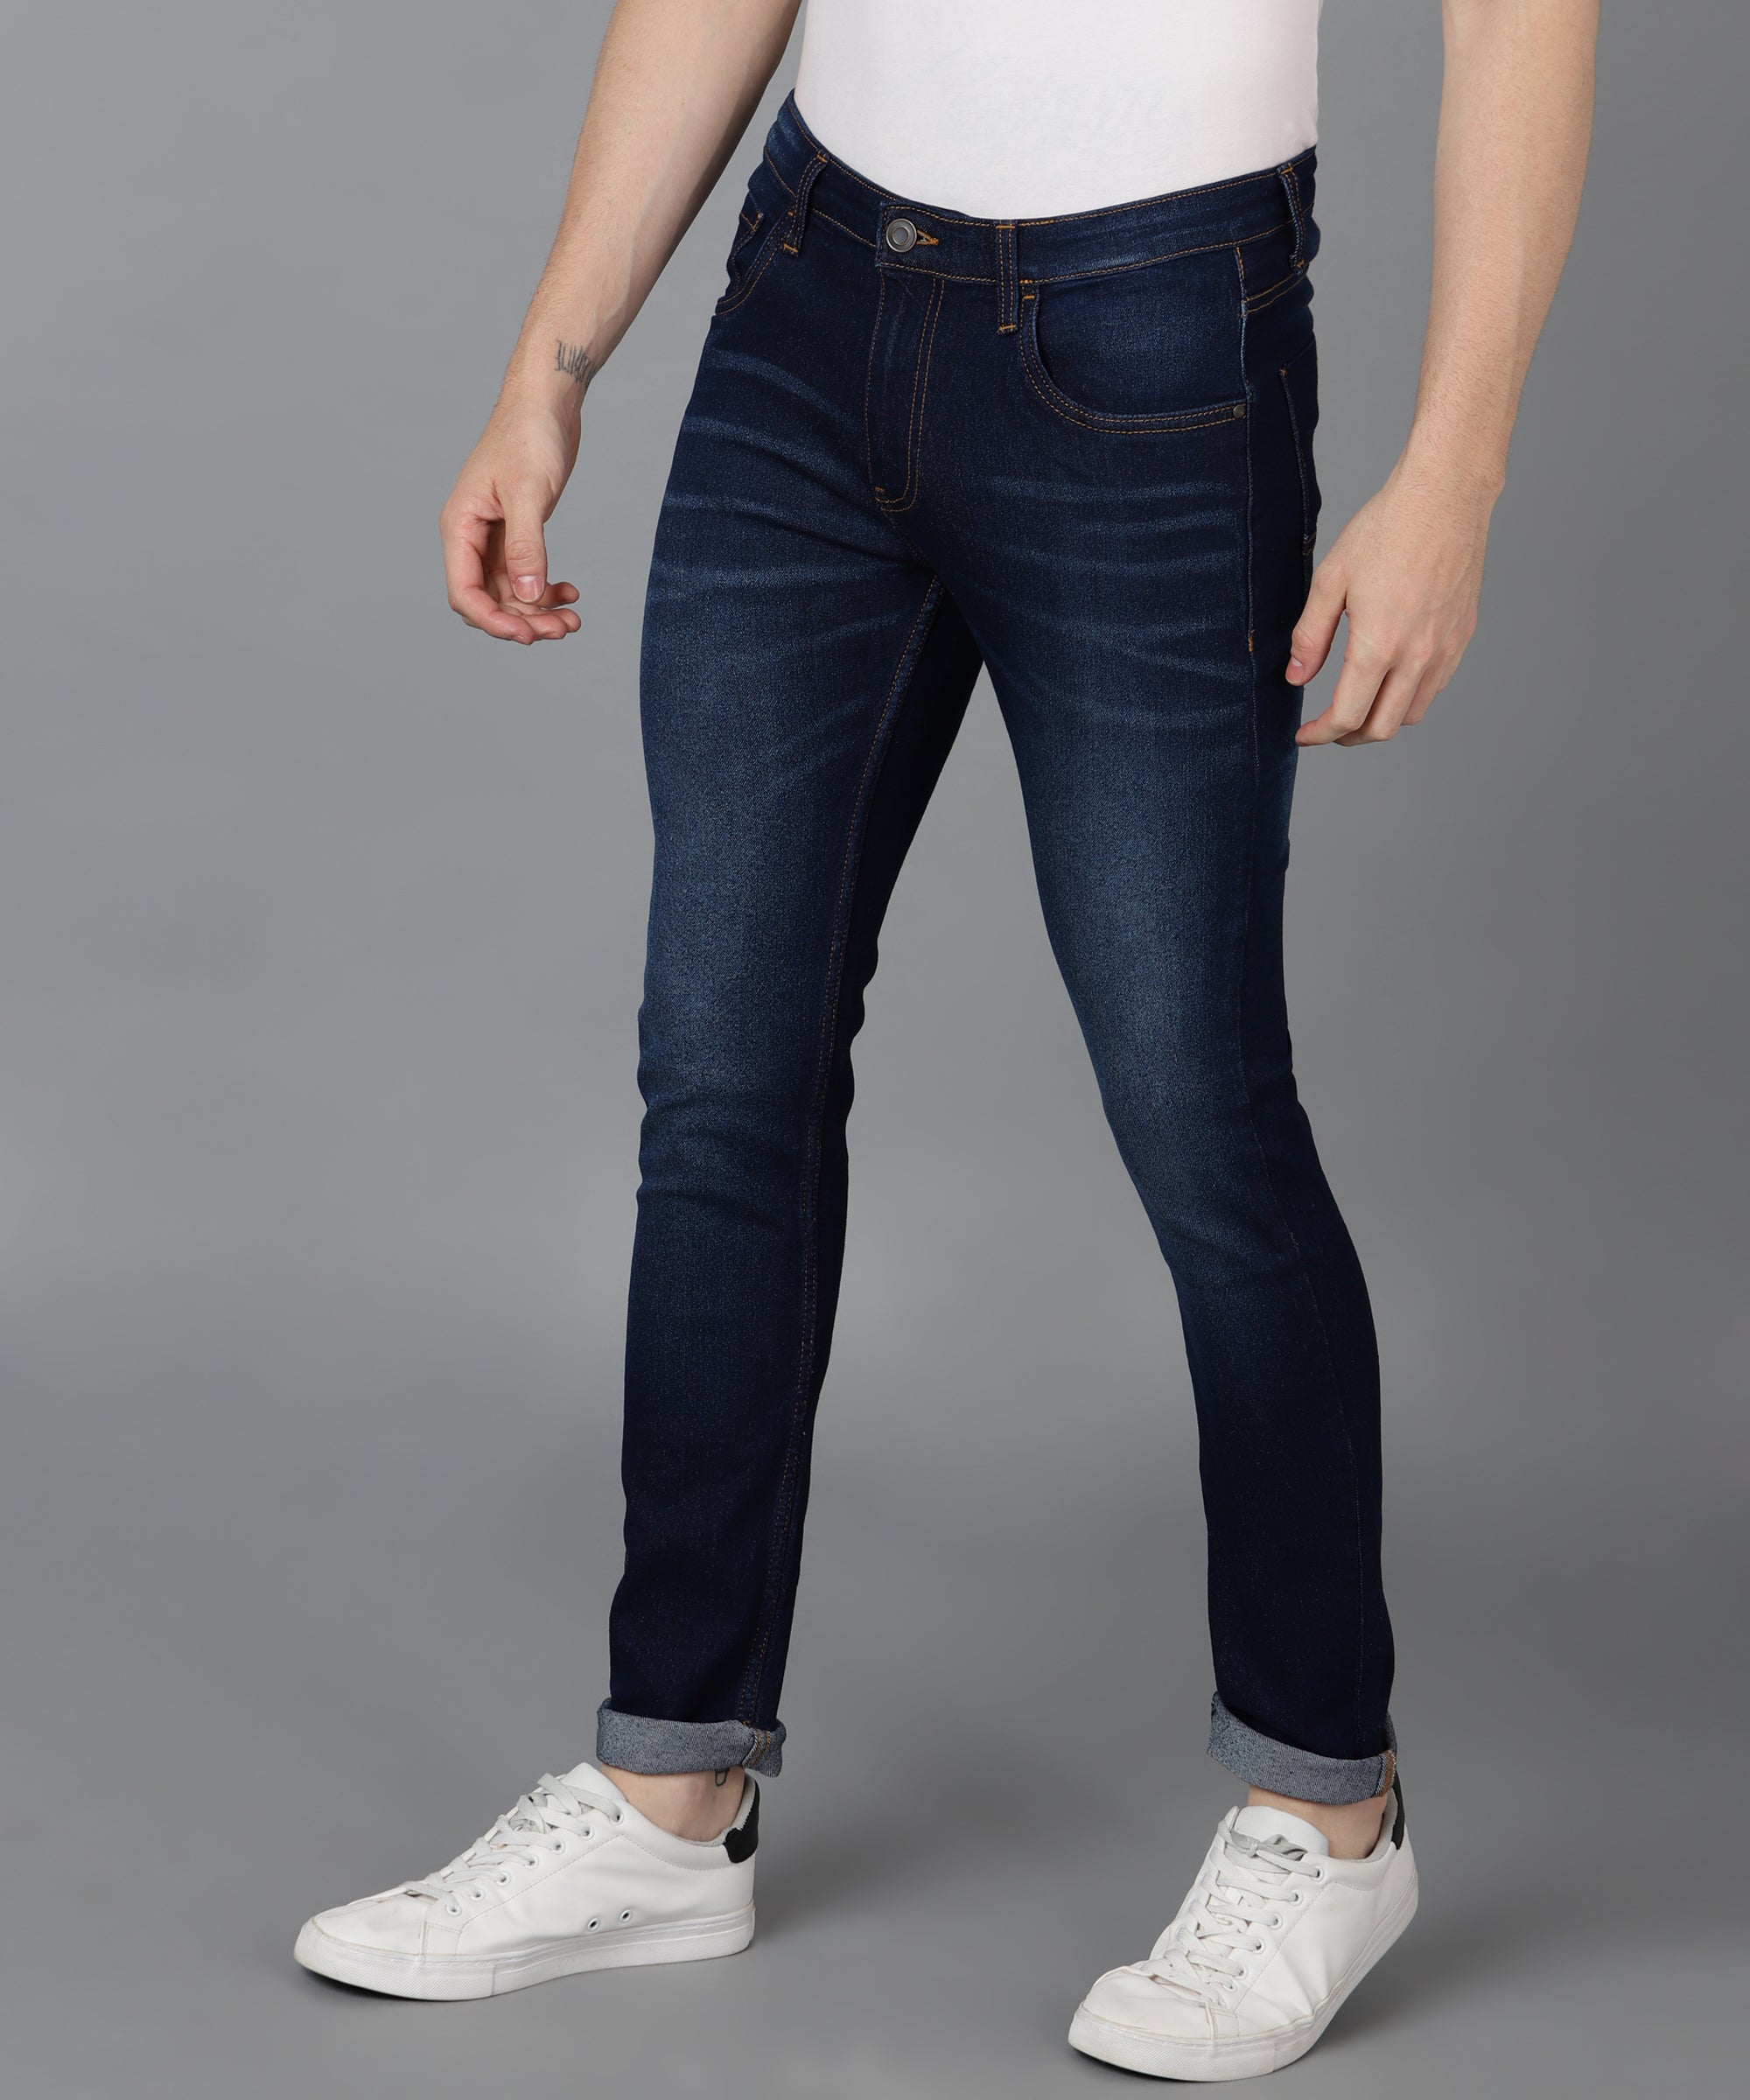 Men's Navy Skinny Fit Washed Jeans Stretchable